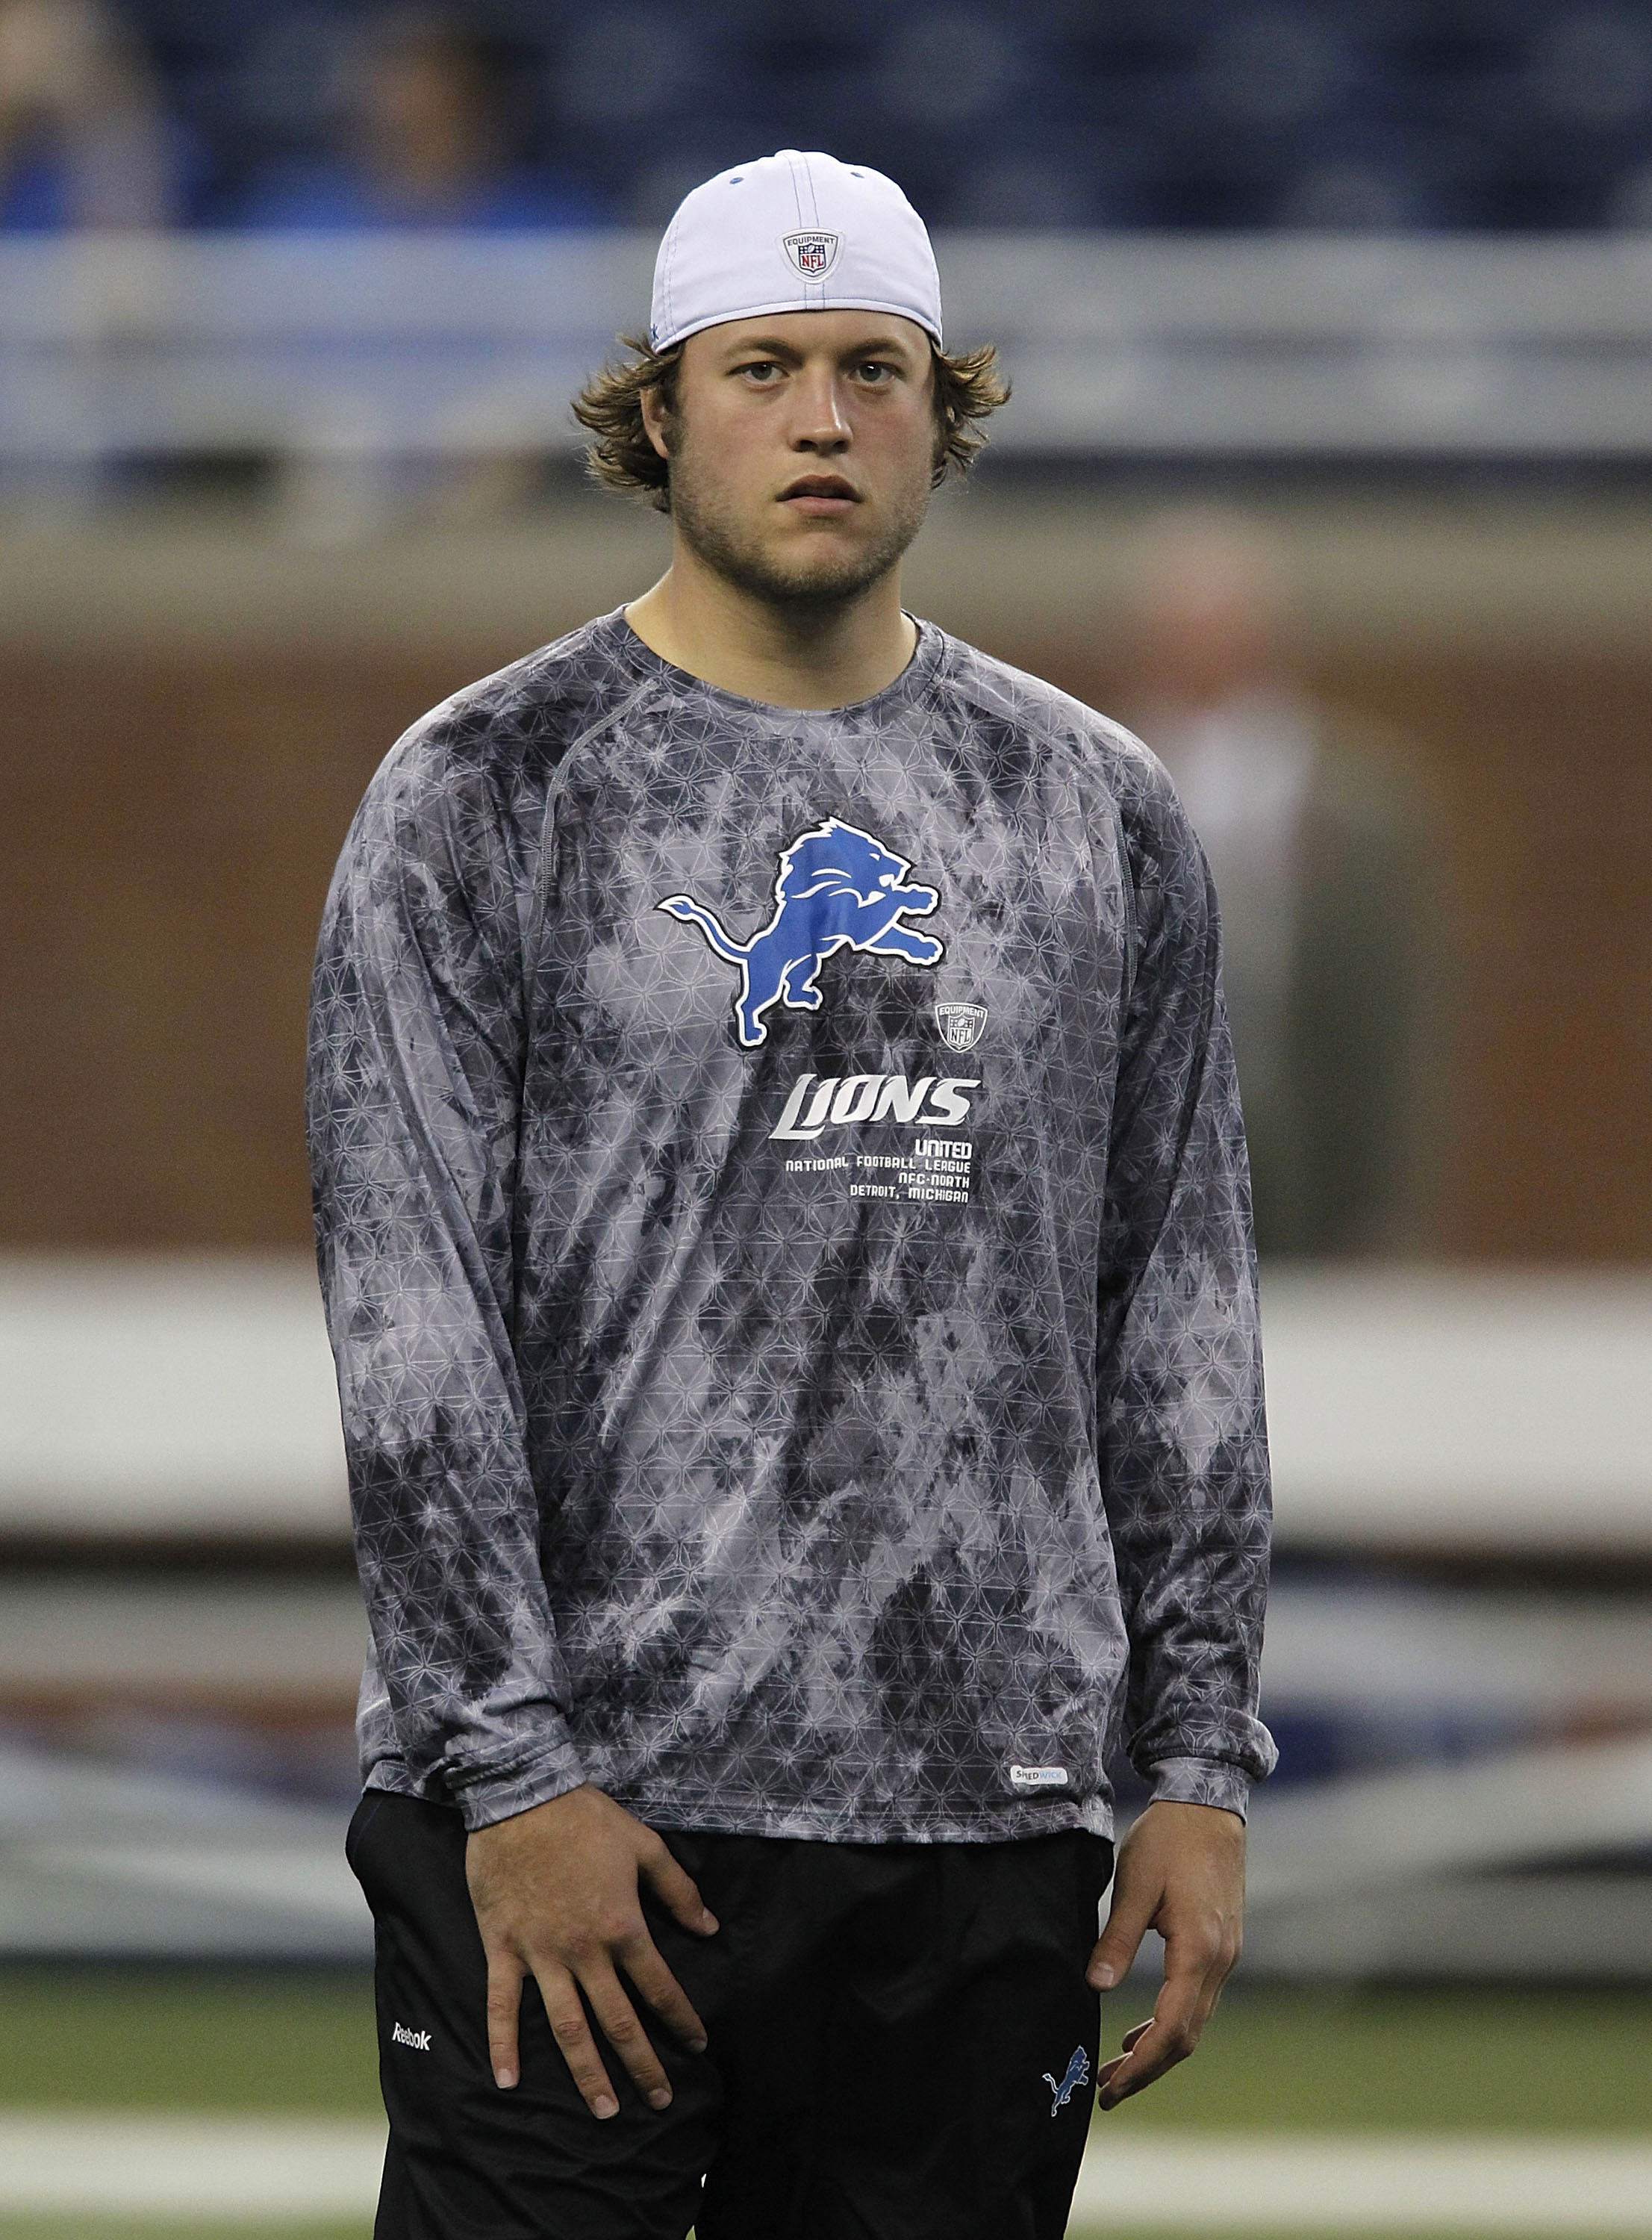 DETROIT - OCTOBER 10:  Matthew Stafford #9 of the Detroit Lions watches the warm ups prior to the start of the game against the St. Louis Rams at Ford Field on October 10, 2010 in Detroit, Michigan.  (Photo by Leon Halip/Getty Images)